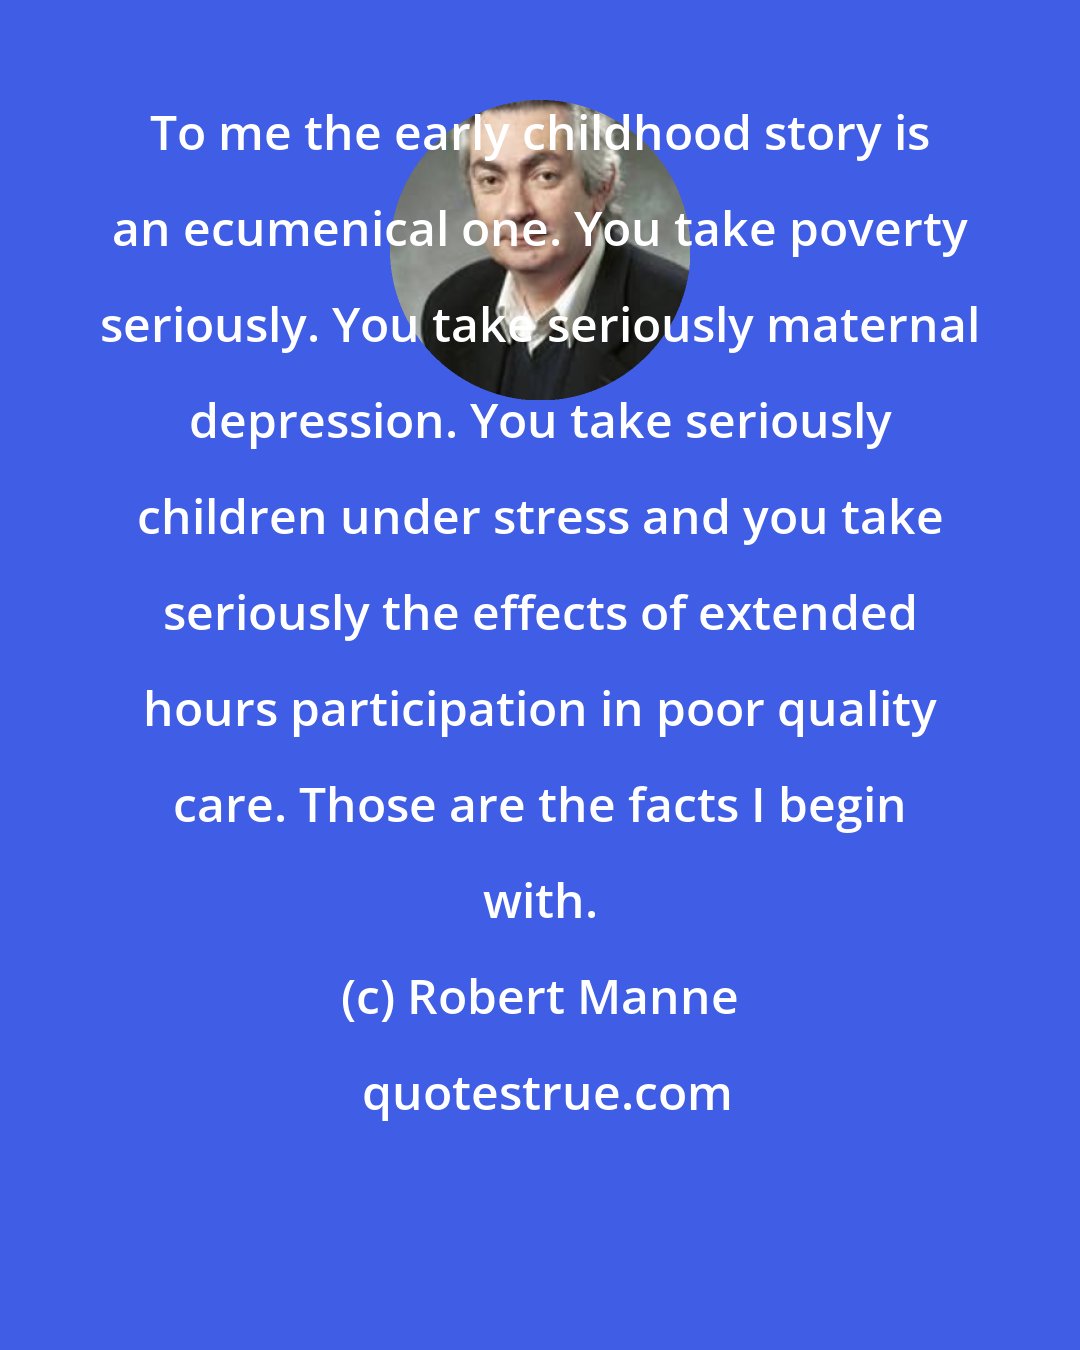 Robert Manne: To me the early childhood story is an ecumenical one. You take poverty seriously. You take seriously maternal depression. You take seriously children under stress and you take seriously the effects of extended hours participation in poor quality care. Those are the facts I begin with.